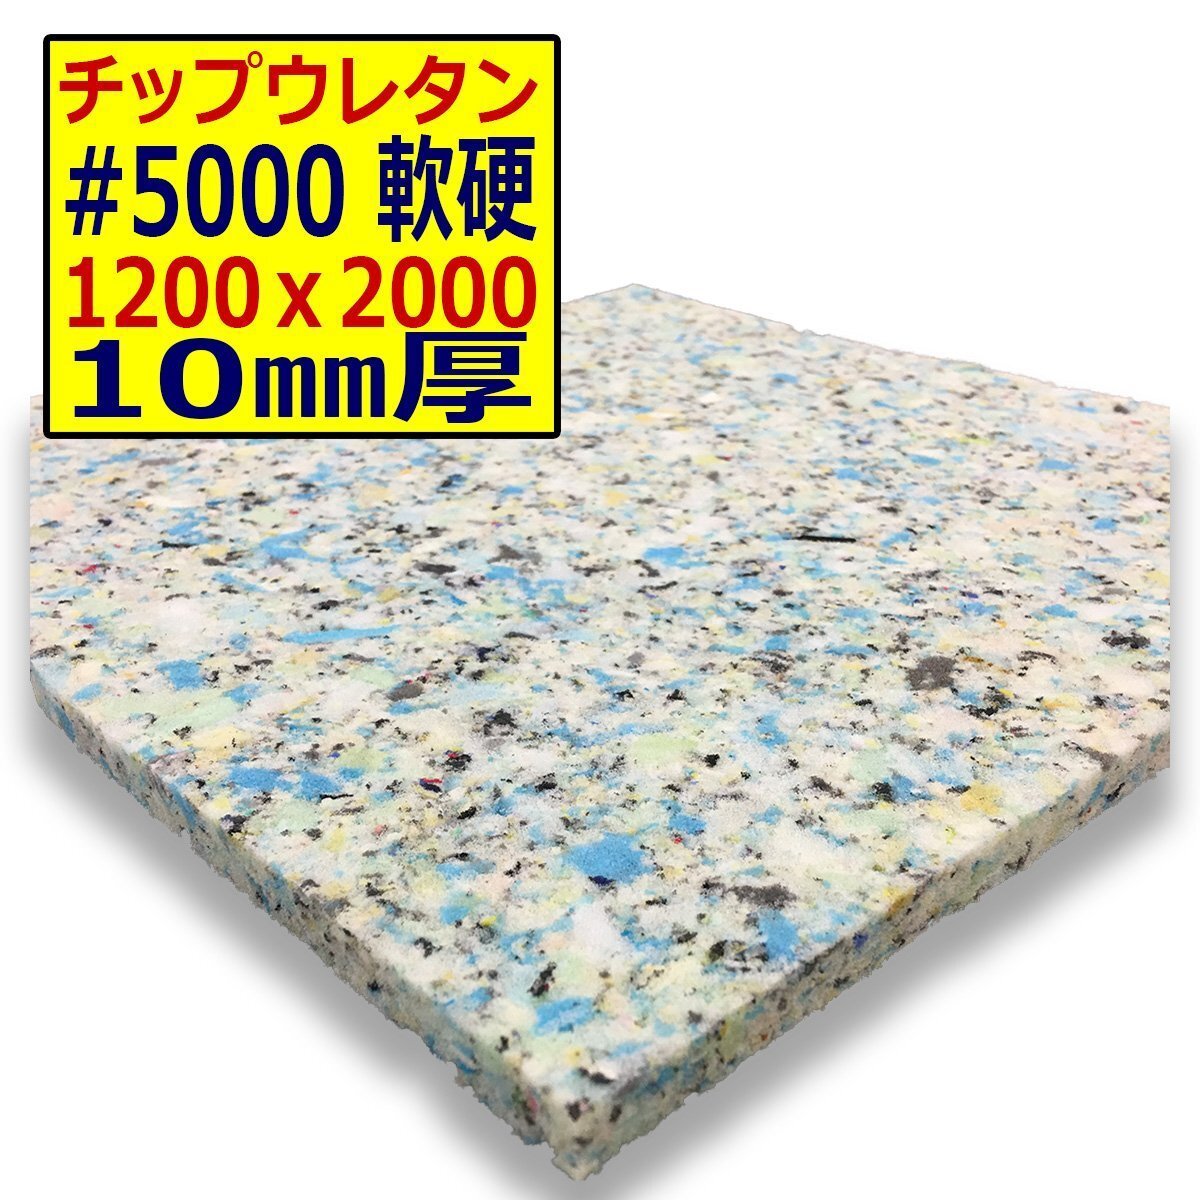  urethane chip [#5000 hardness ..]1200x2000mm[ thickness 10mm] seat repair / sleeping area in the vehicle for bed / camper / deadning /